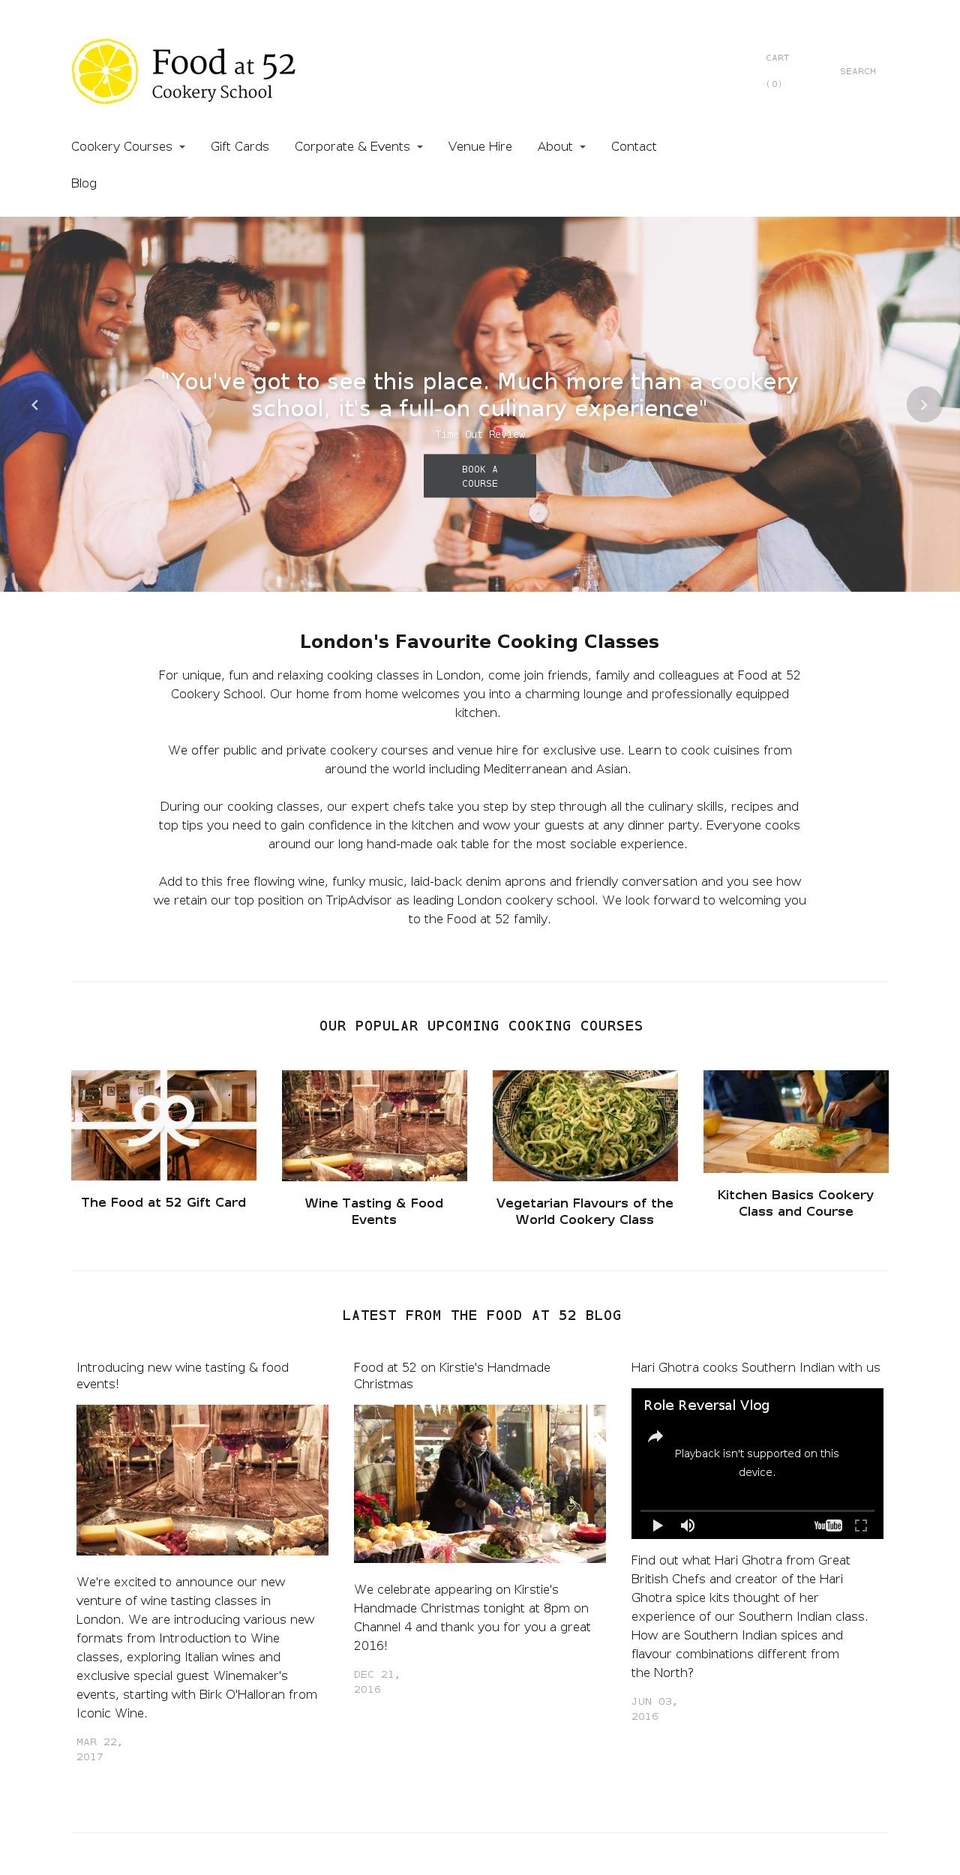 Cypress Shopify theme site example foodat52.com